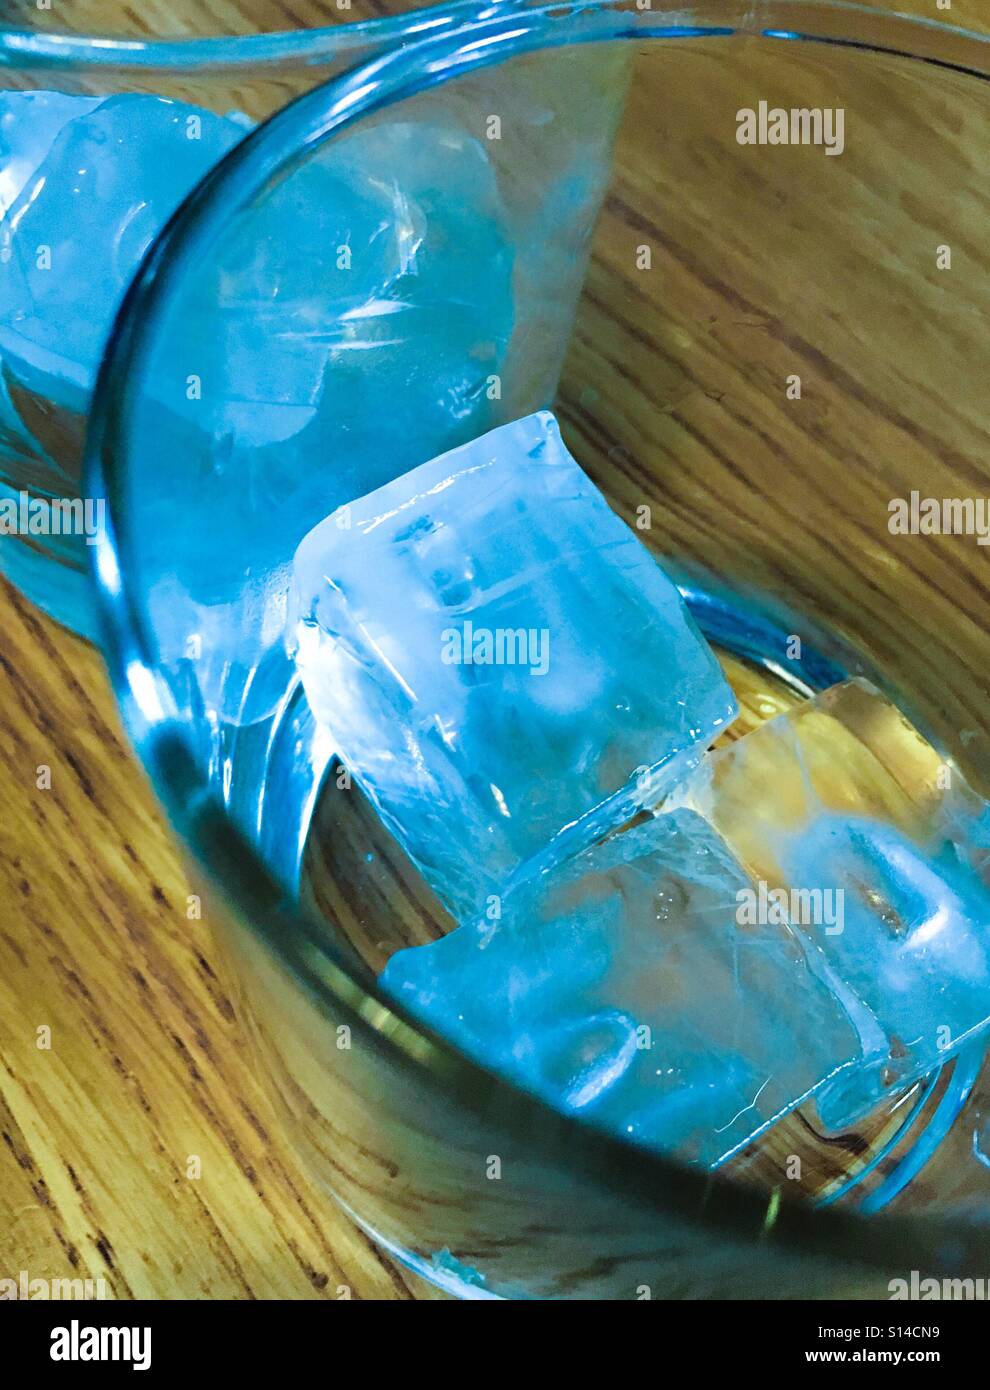 Blue ice cubes in a glass Stock Photo